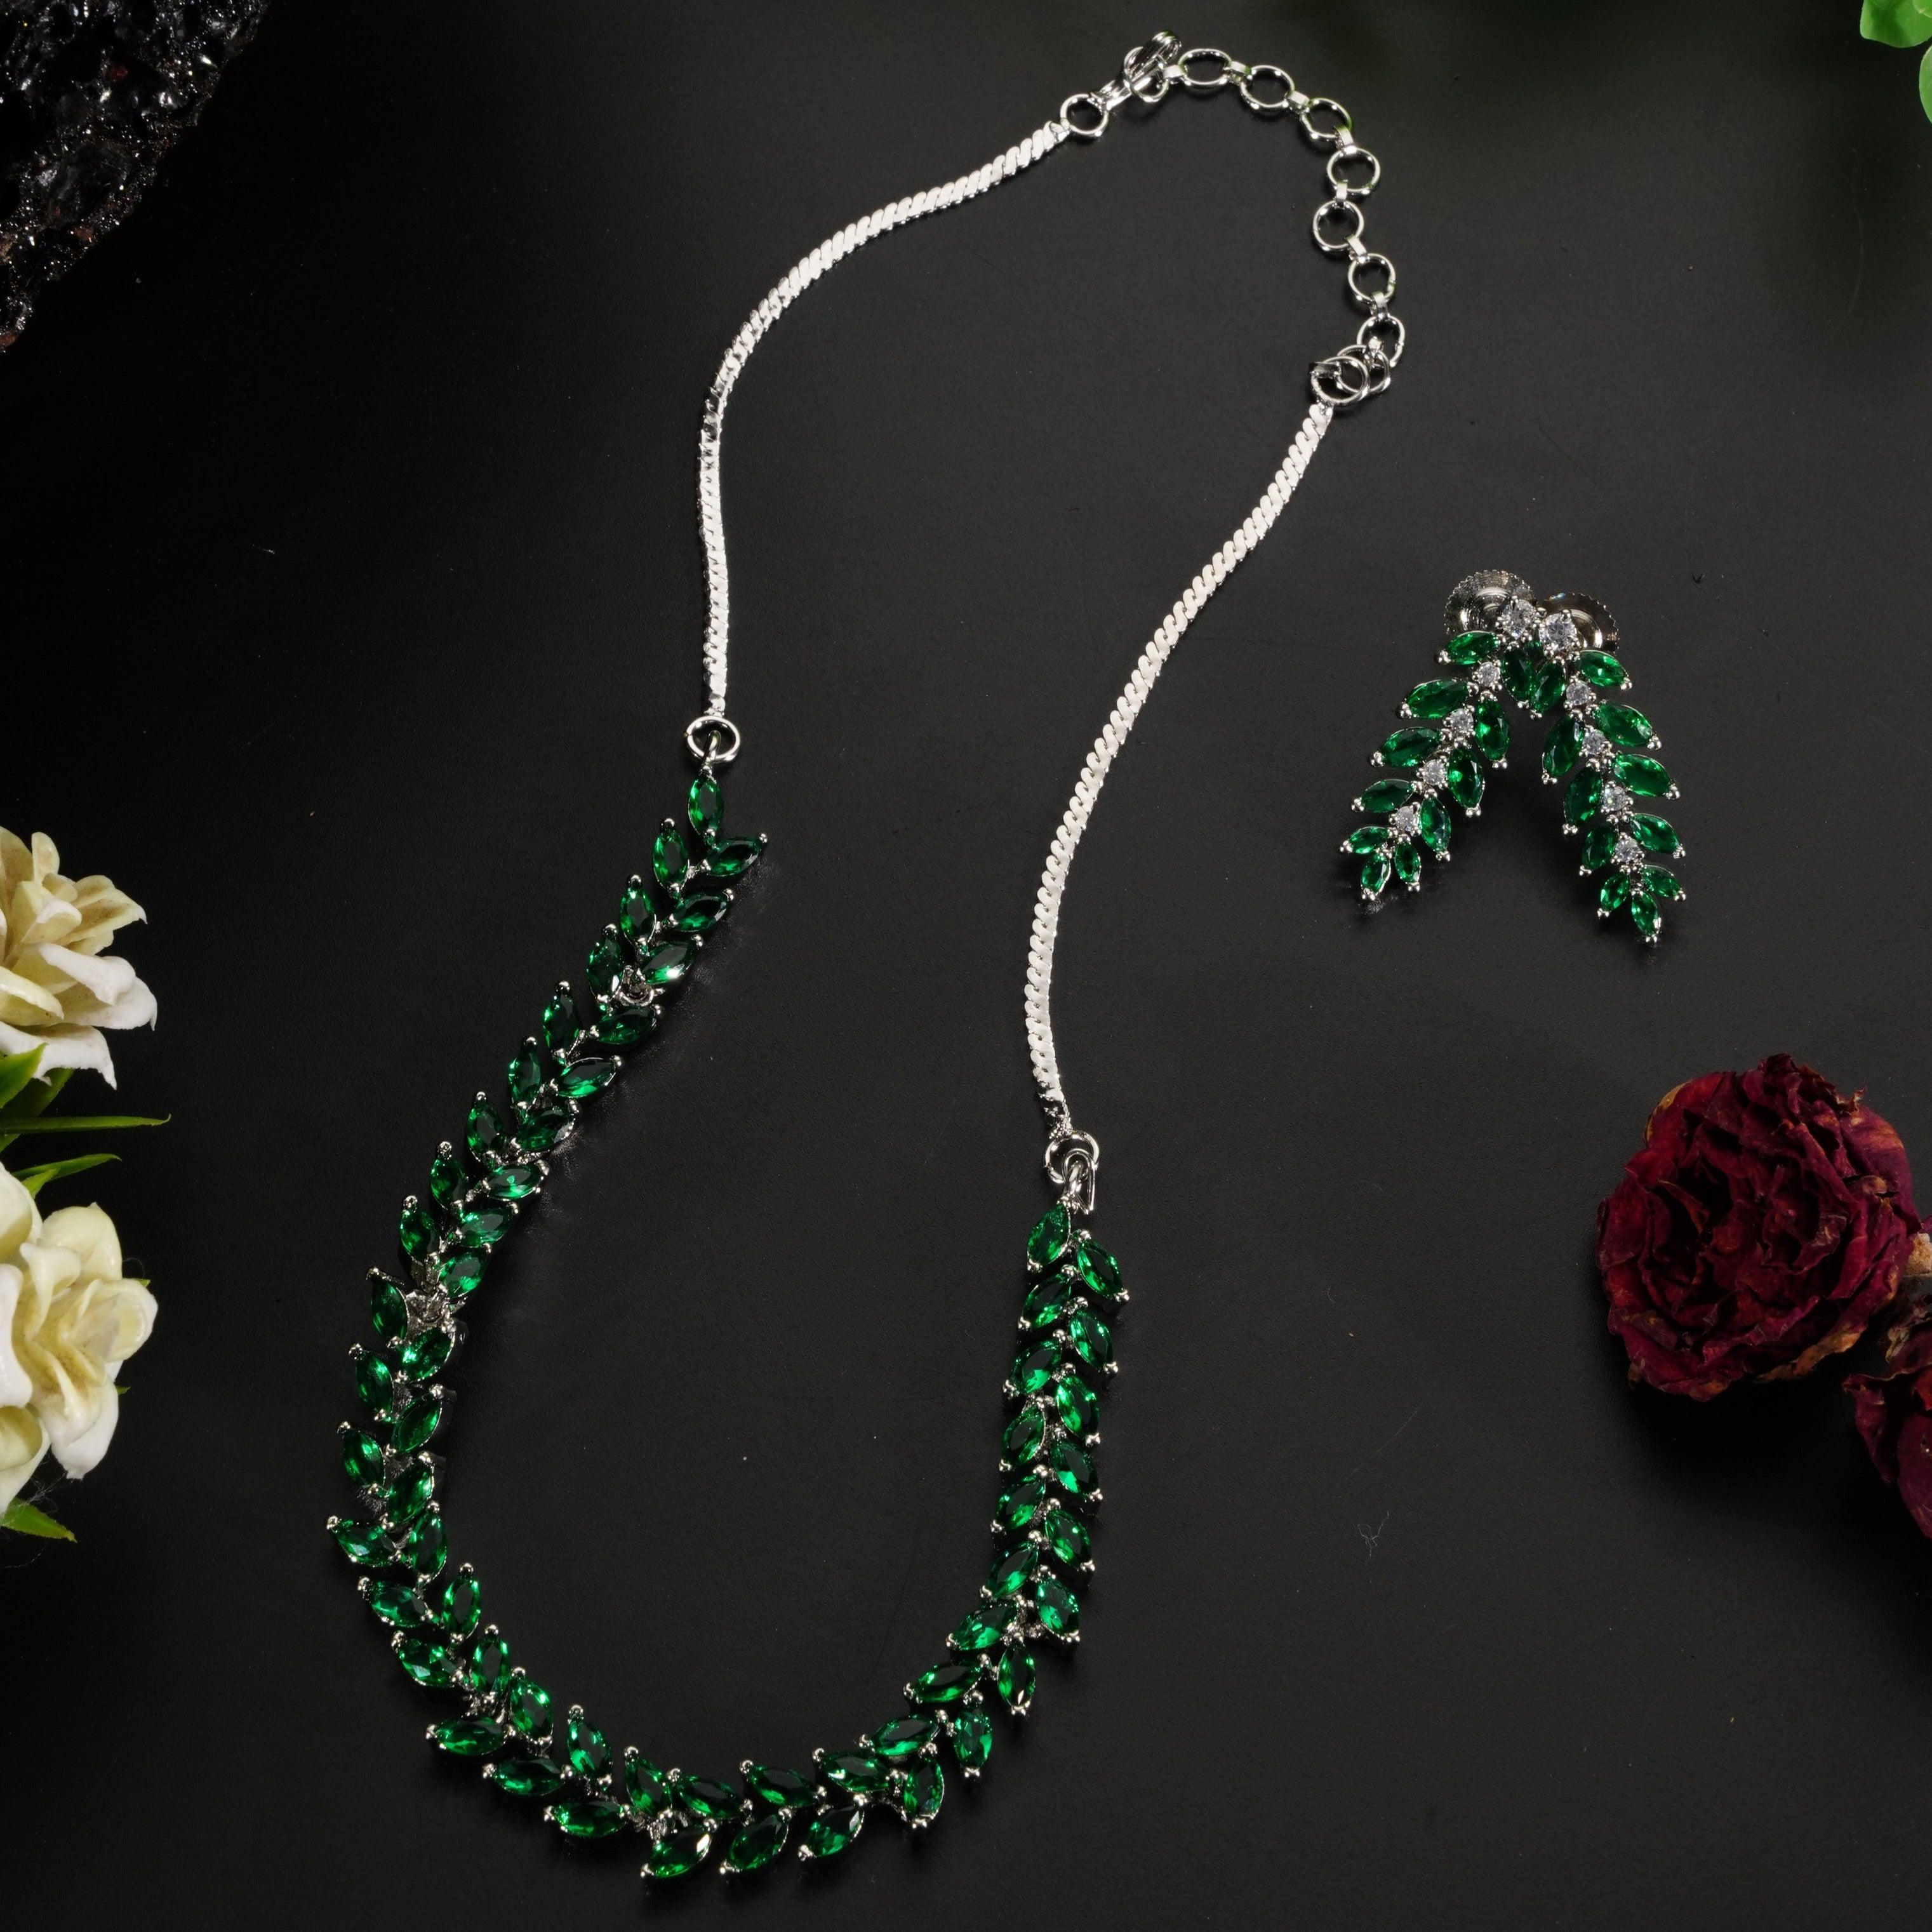 Premium Sayara Collection Necklace with Green Pear Shaped CZ Stone Set 8747N-Necklace Set-season end sale item-Griiham